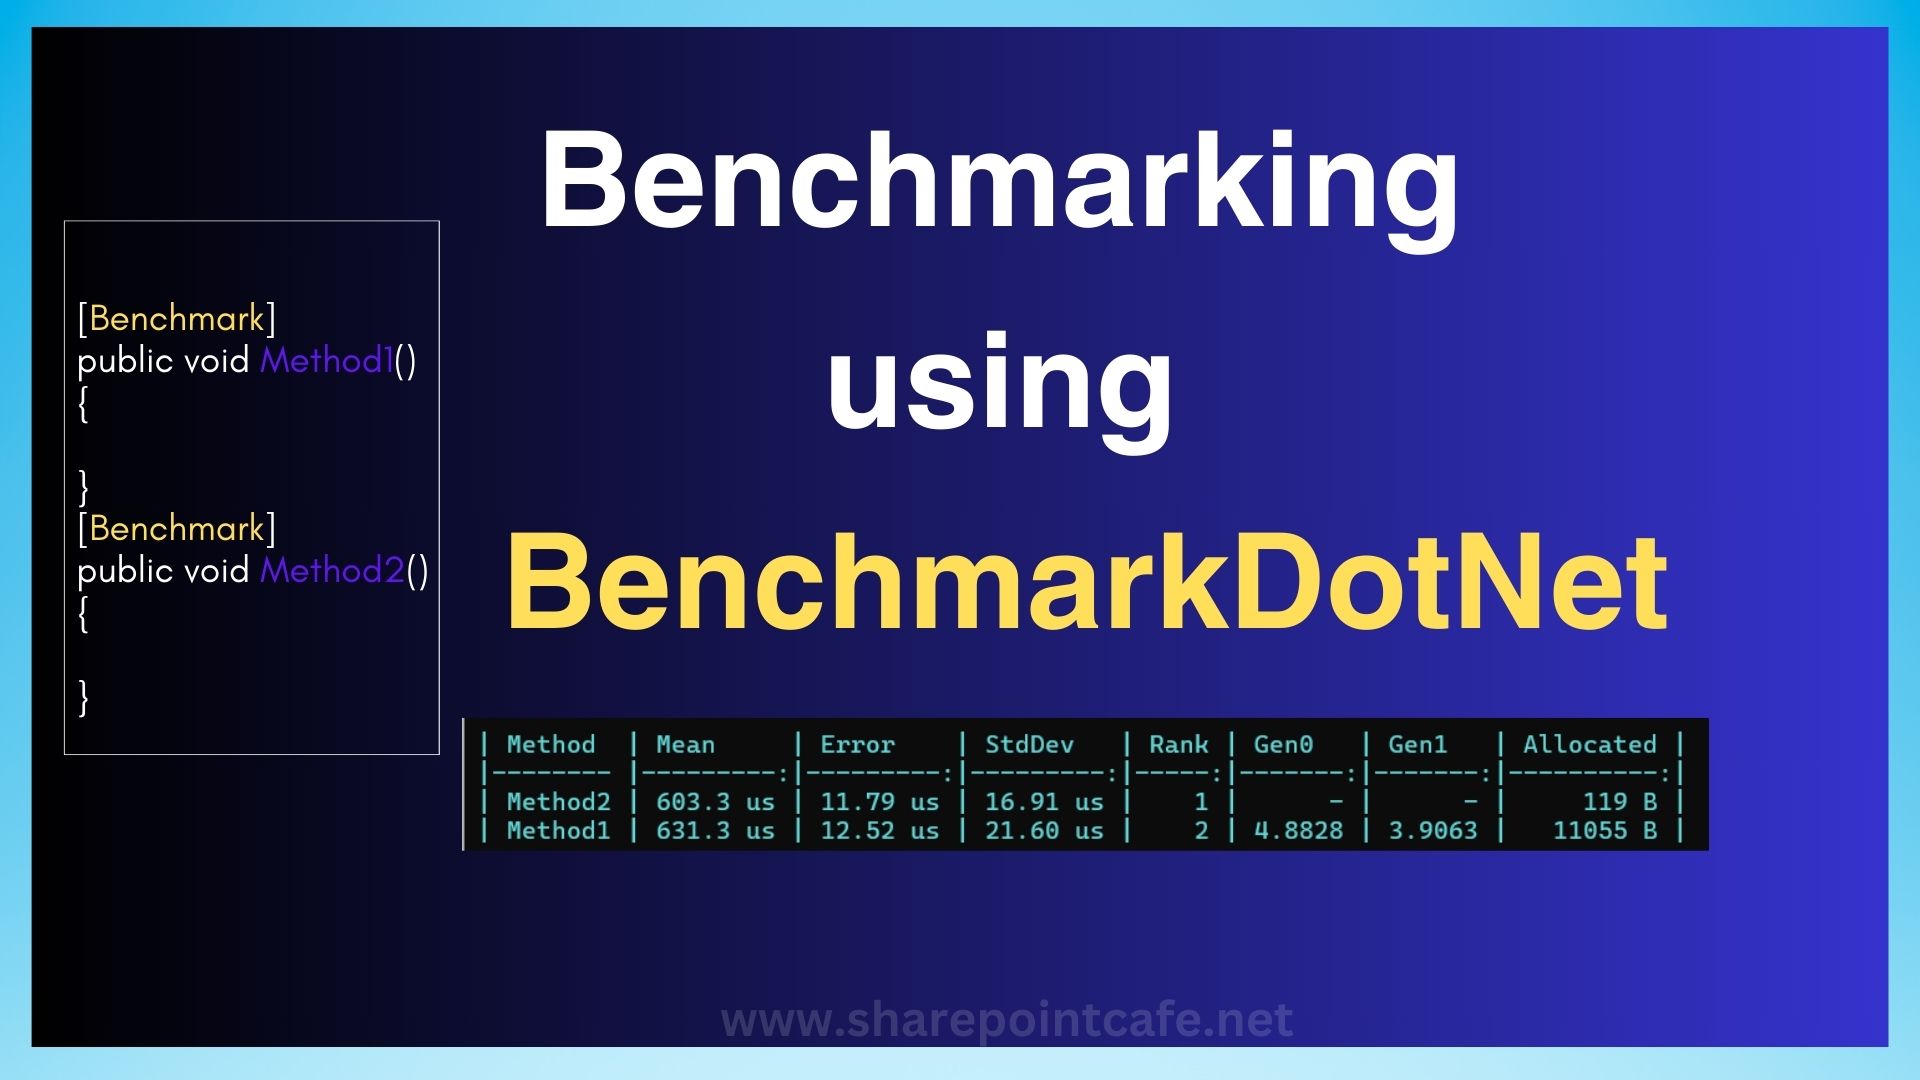 Benchmarking with BenchmarkDotNet